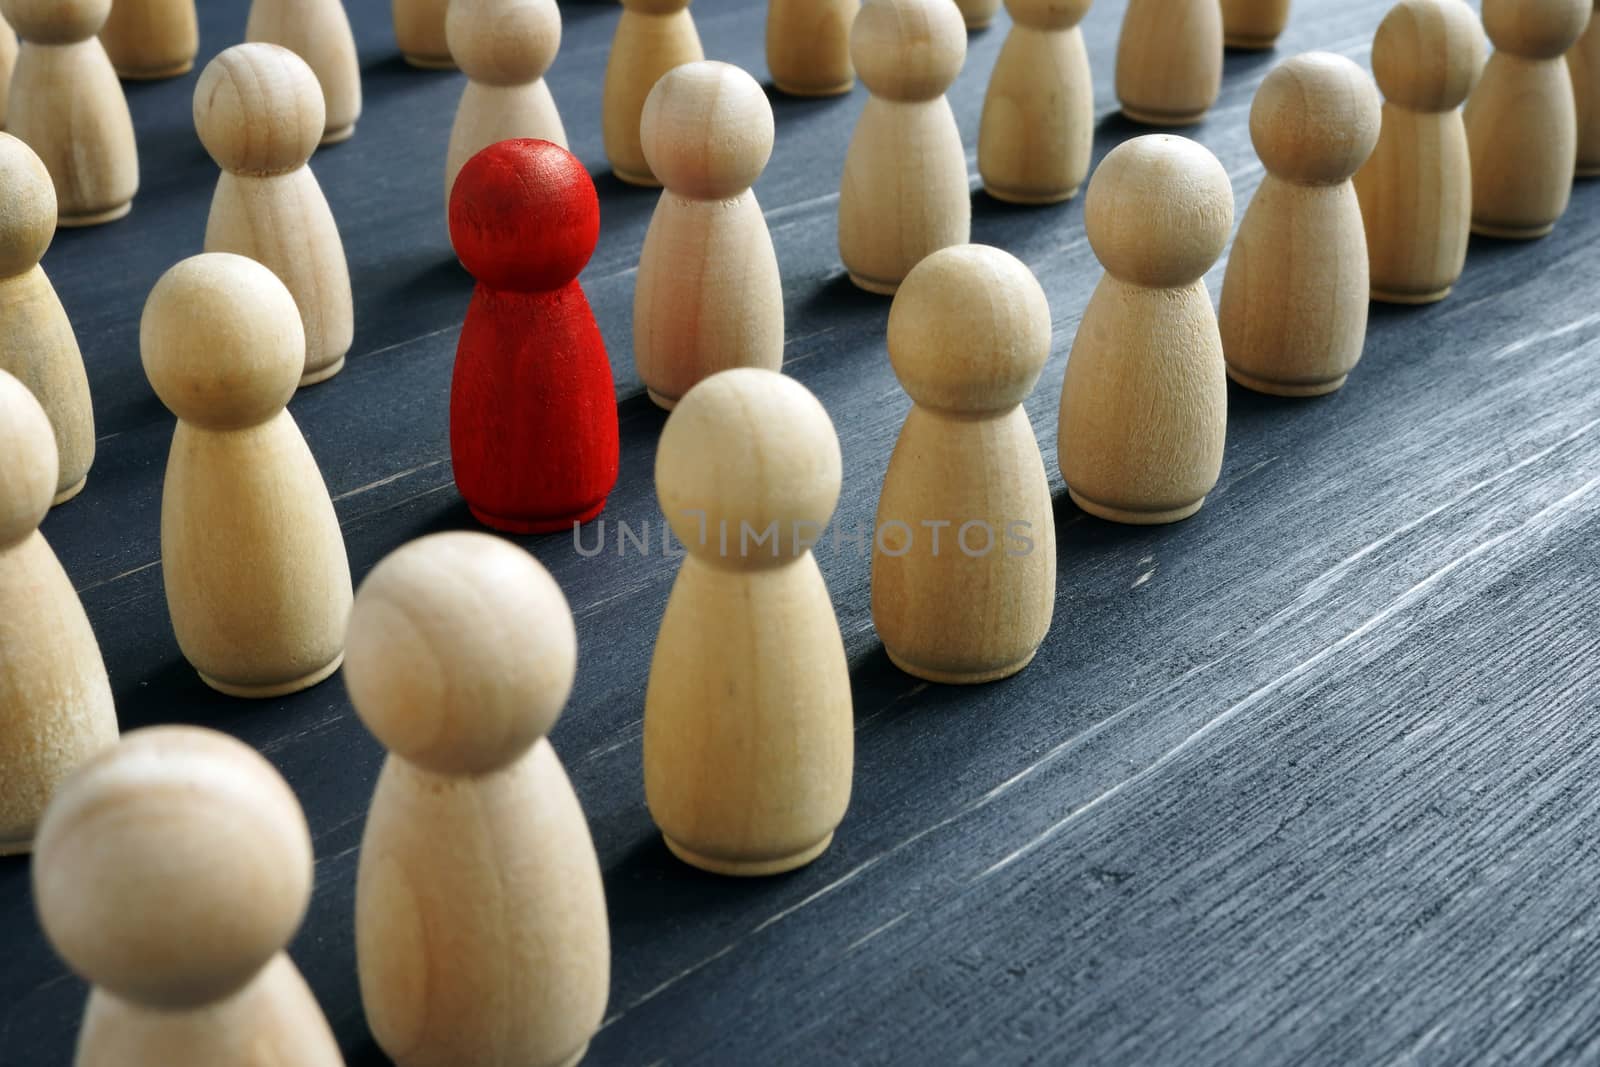 Unique and different concept. Crowd of wooden figures and red one.